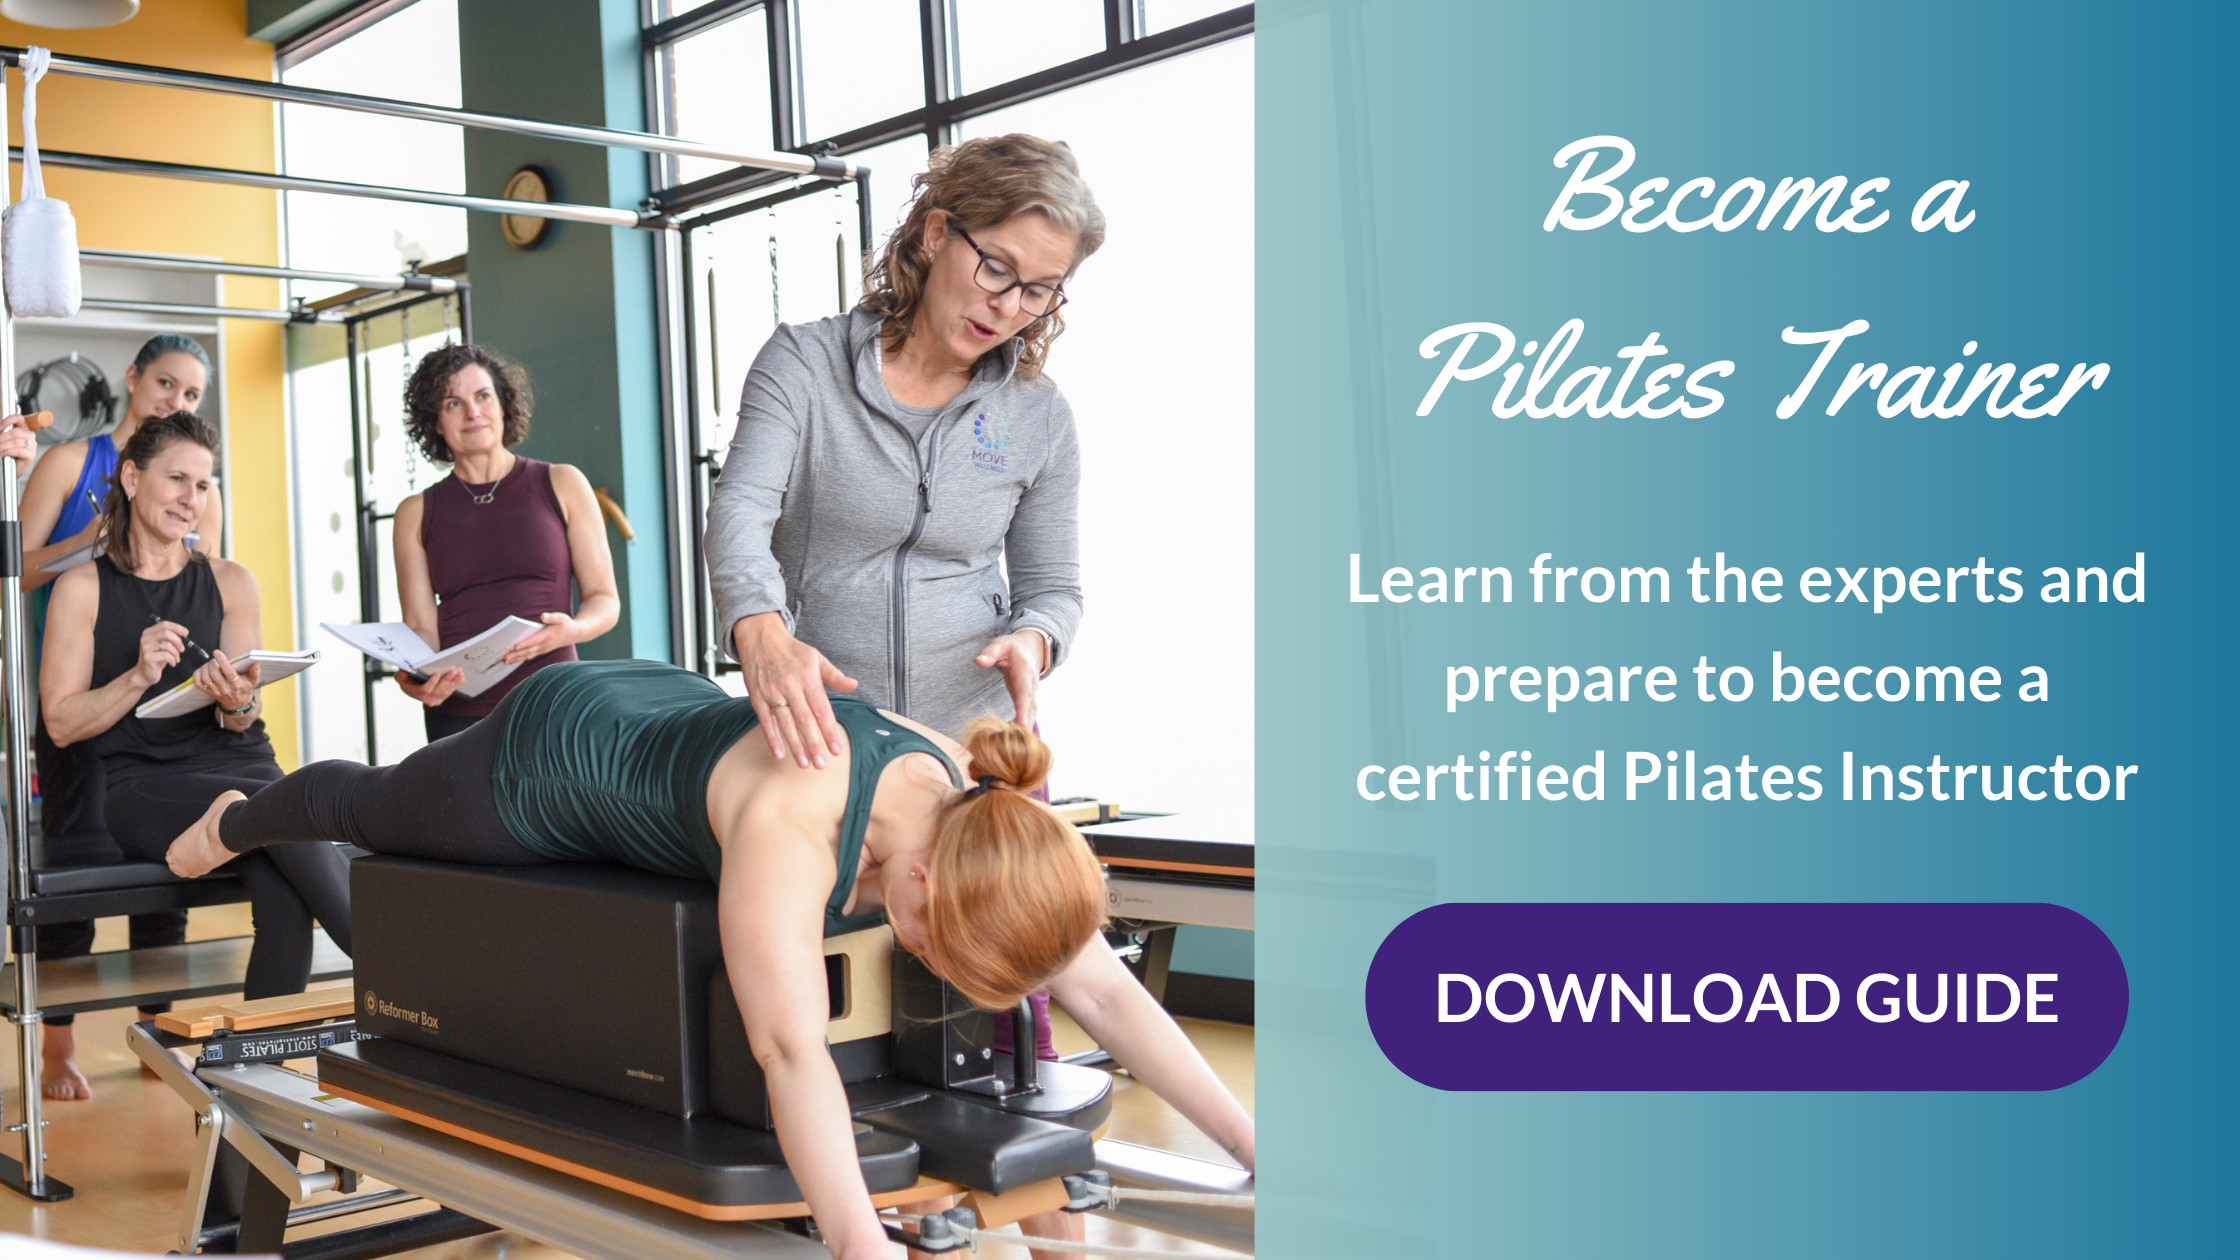 Become a Pilates Trainer